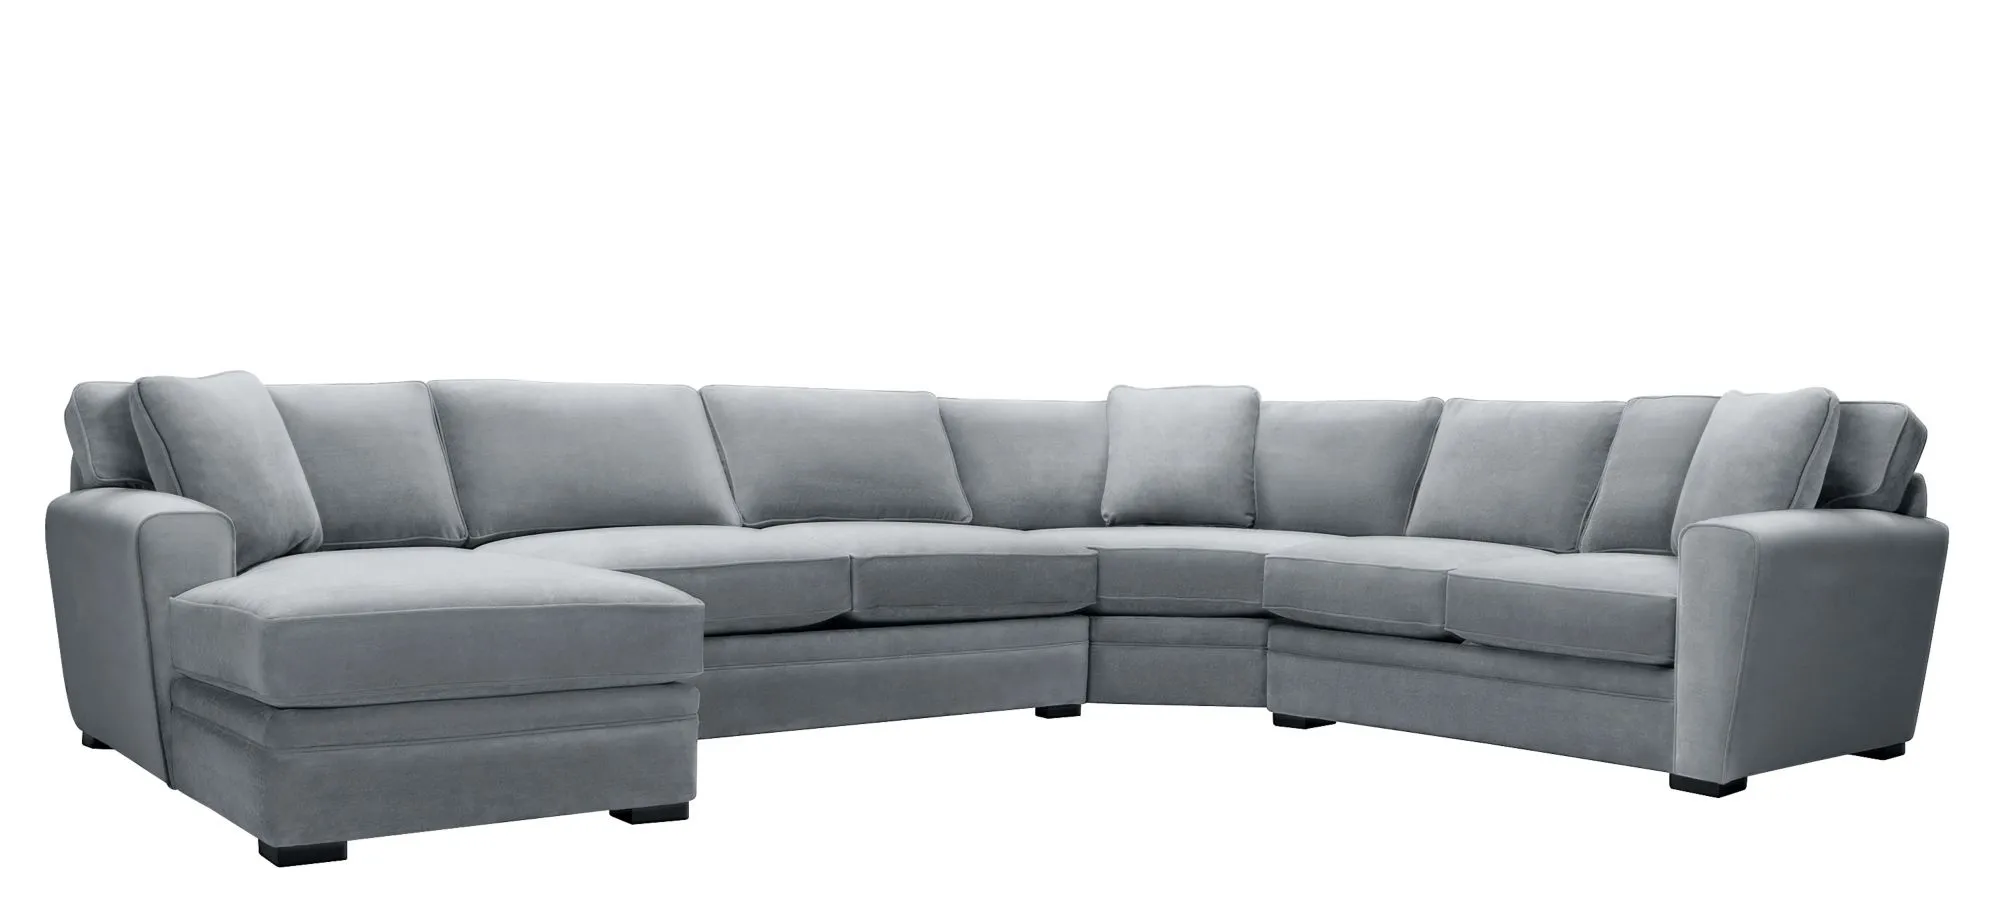 Artemis II 4-pc. Left Hand Facing Sectional Sofa in Gypsy Quarry by Jonathan Louis